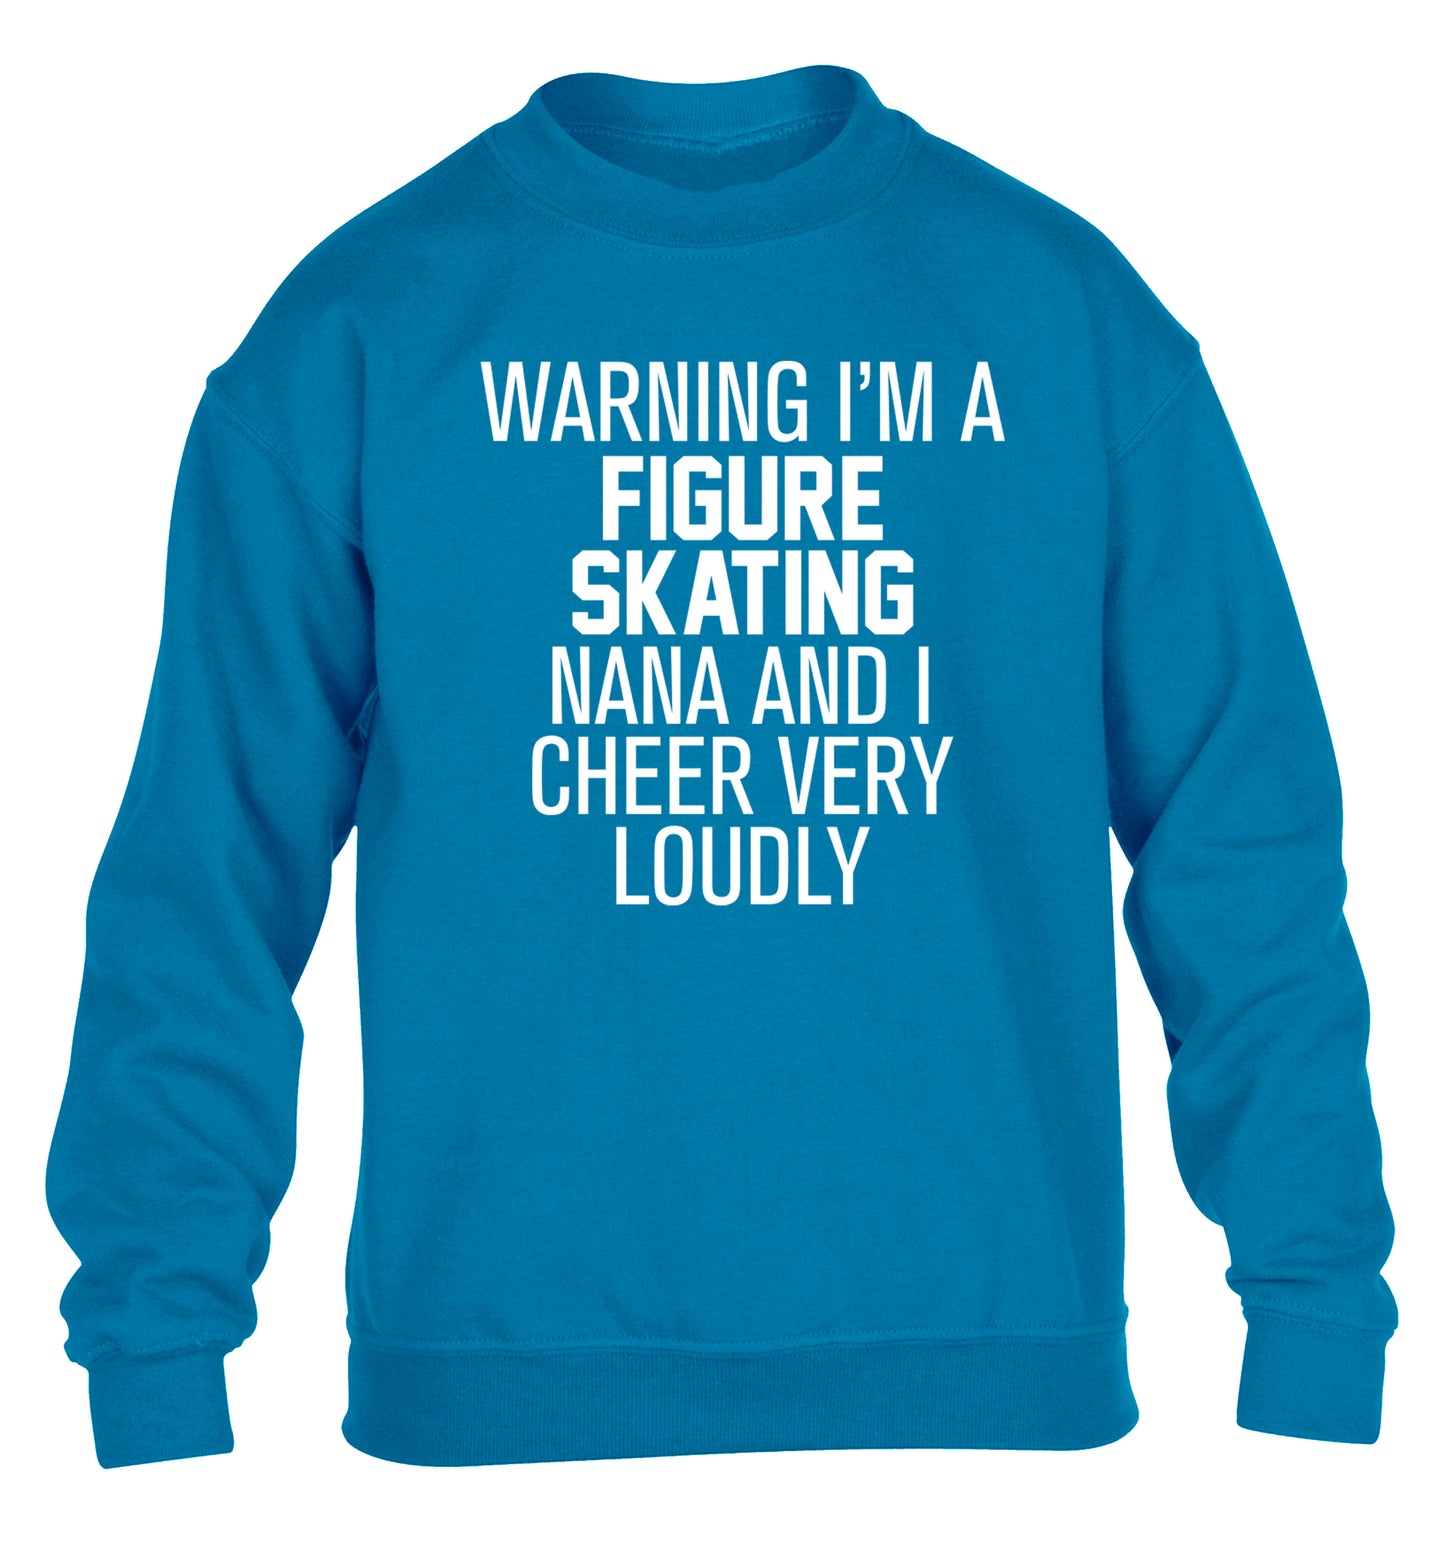 Warning I'm a figure skating nana and I cheer very loudly children's blue sweater 12-14 Years